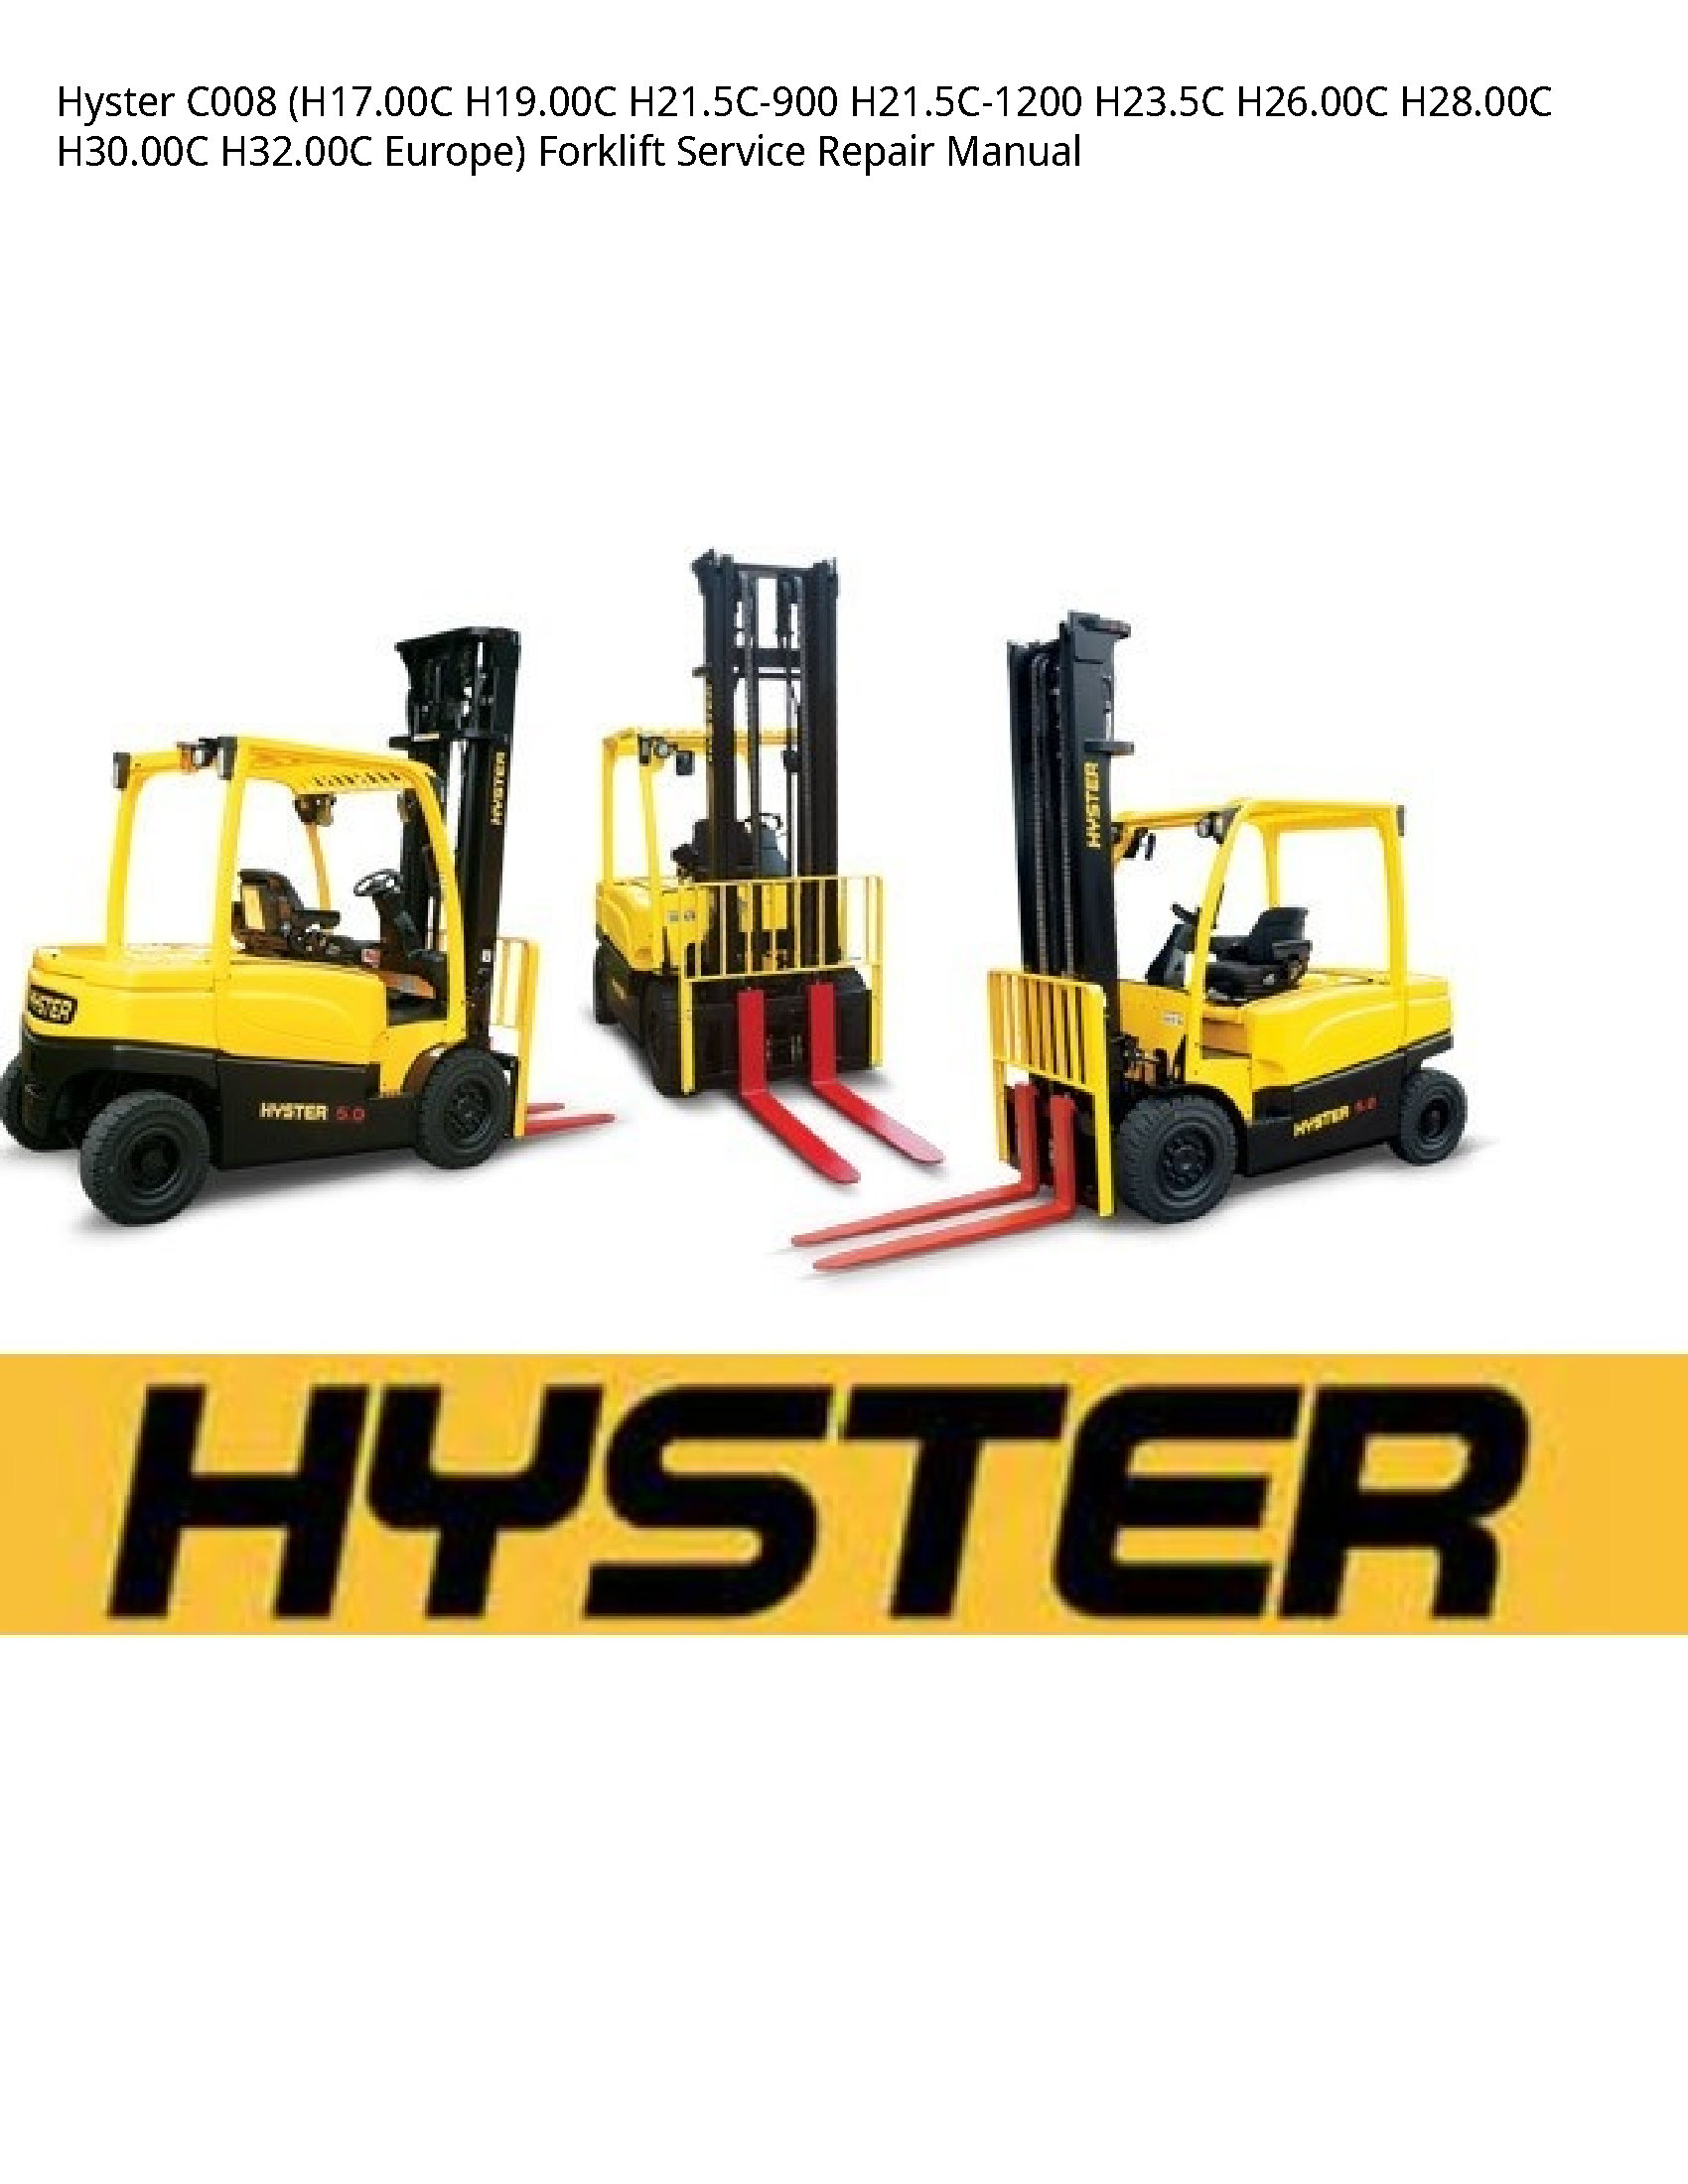 Hyster C008 Europe) Forklift manual